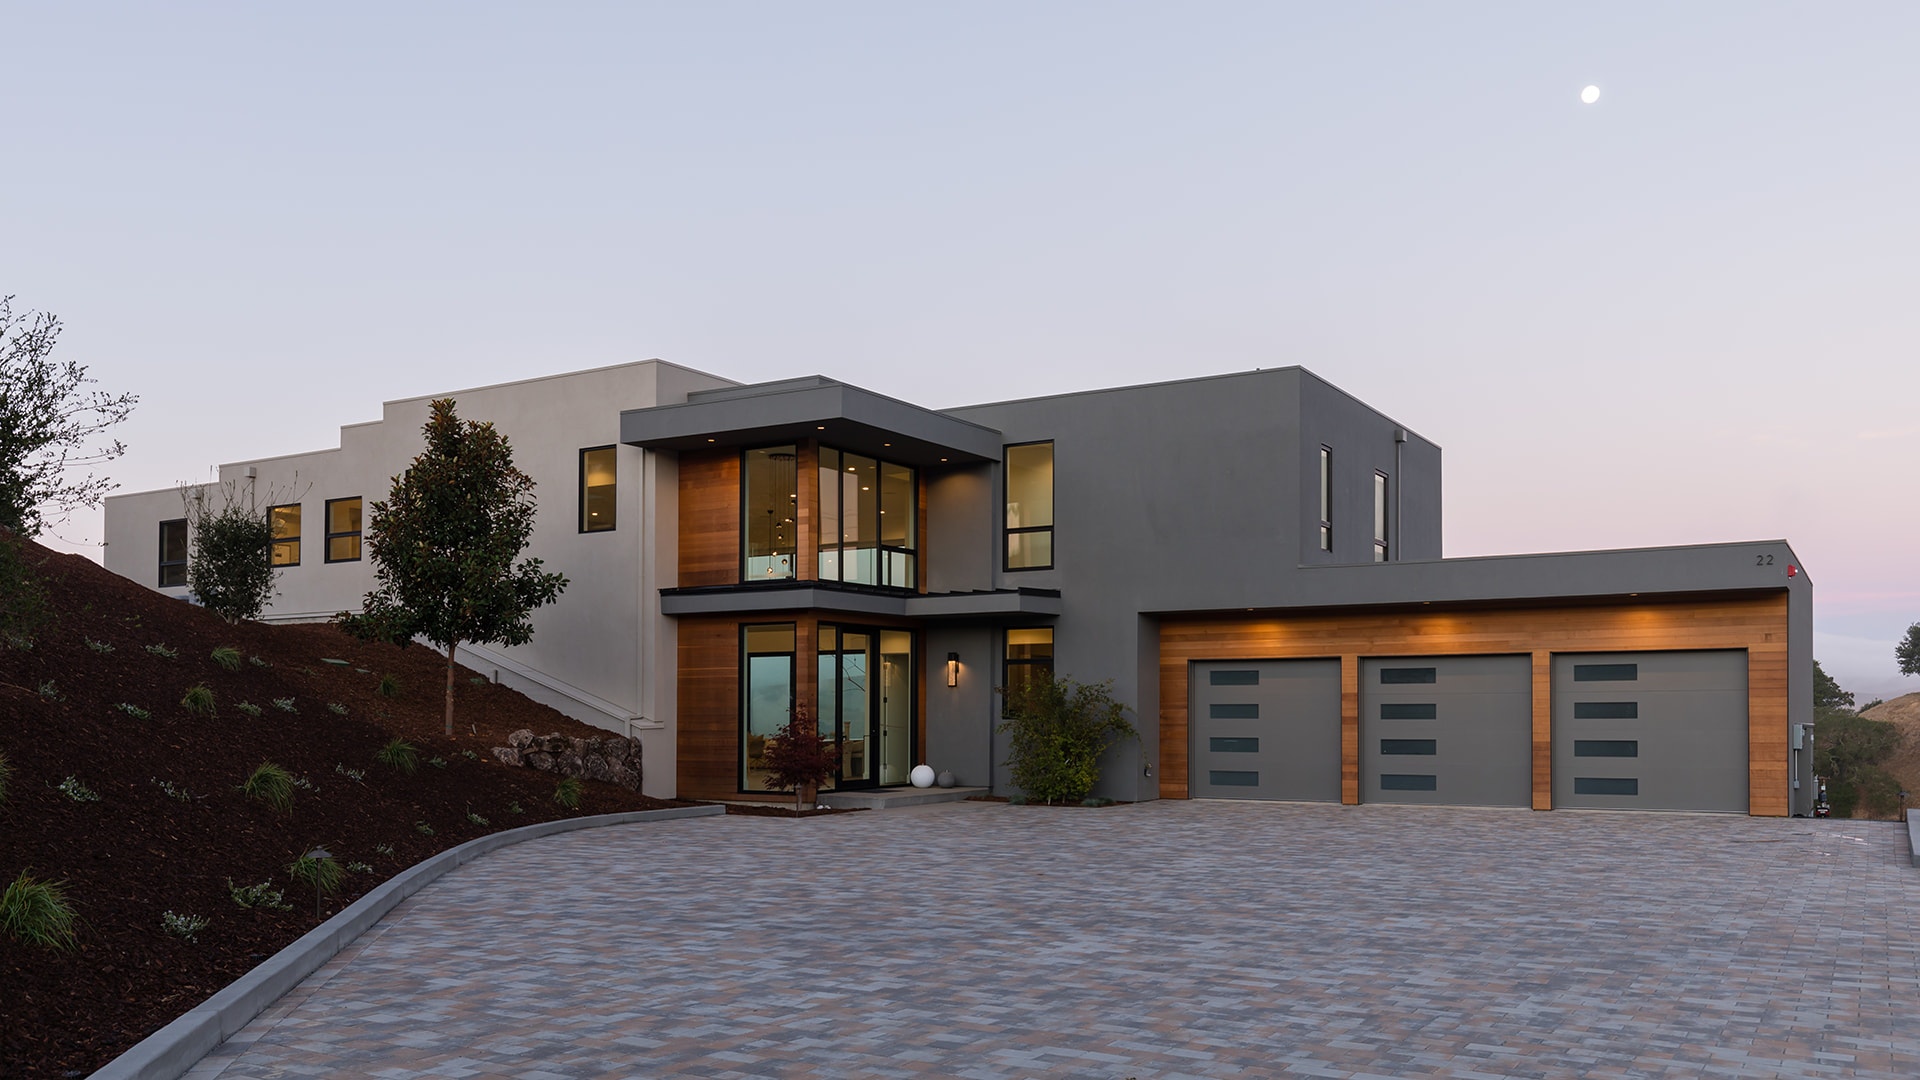 A California hilltop home exterior with a stone driveway